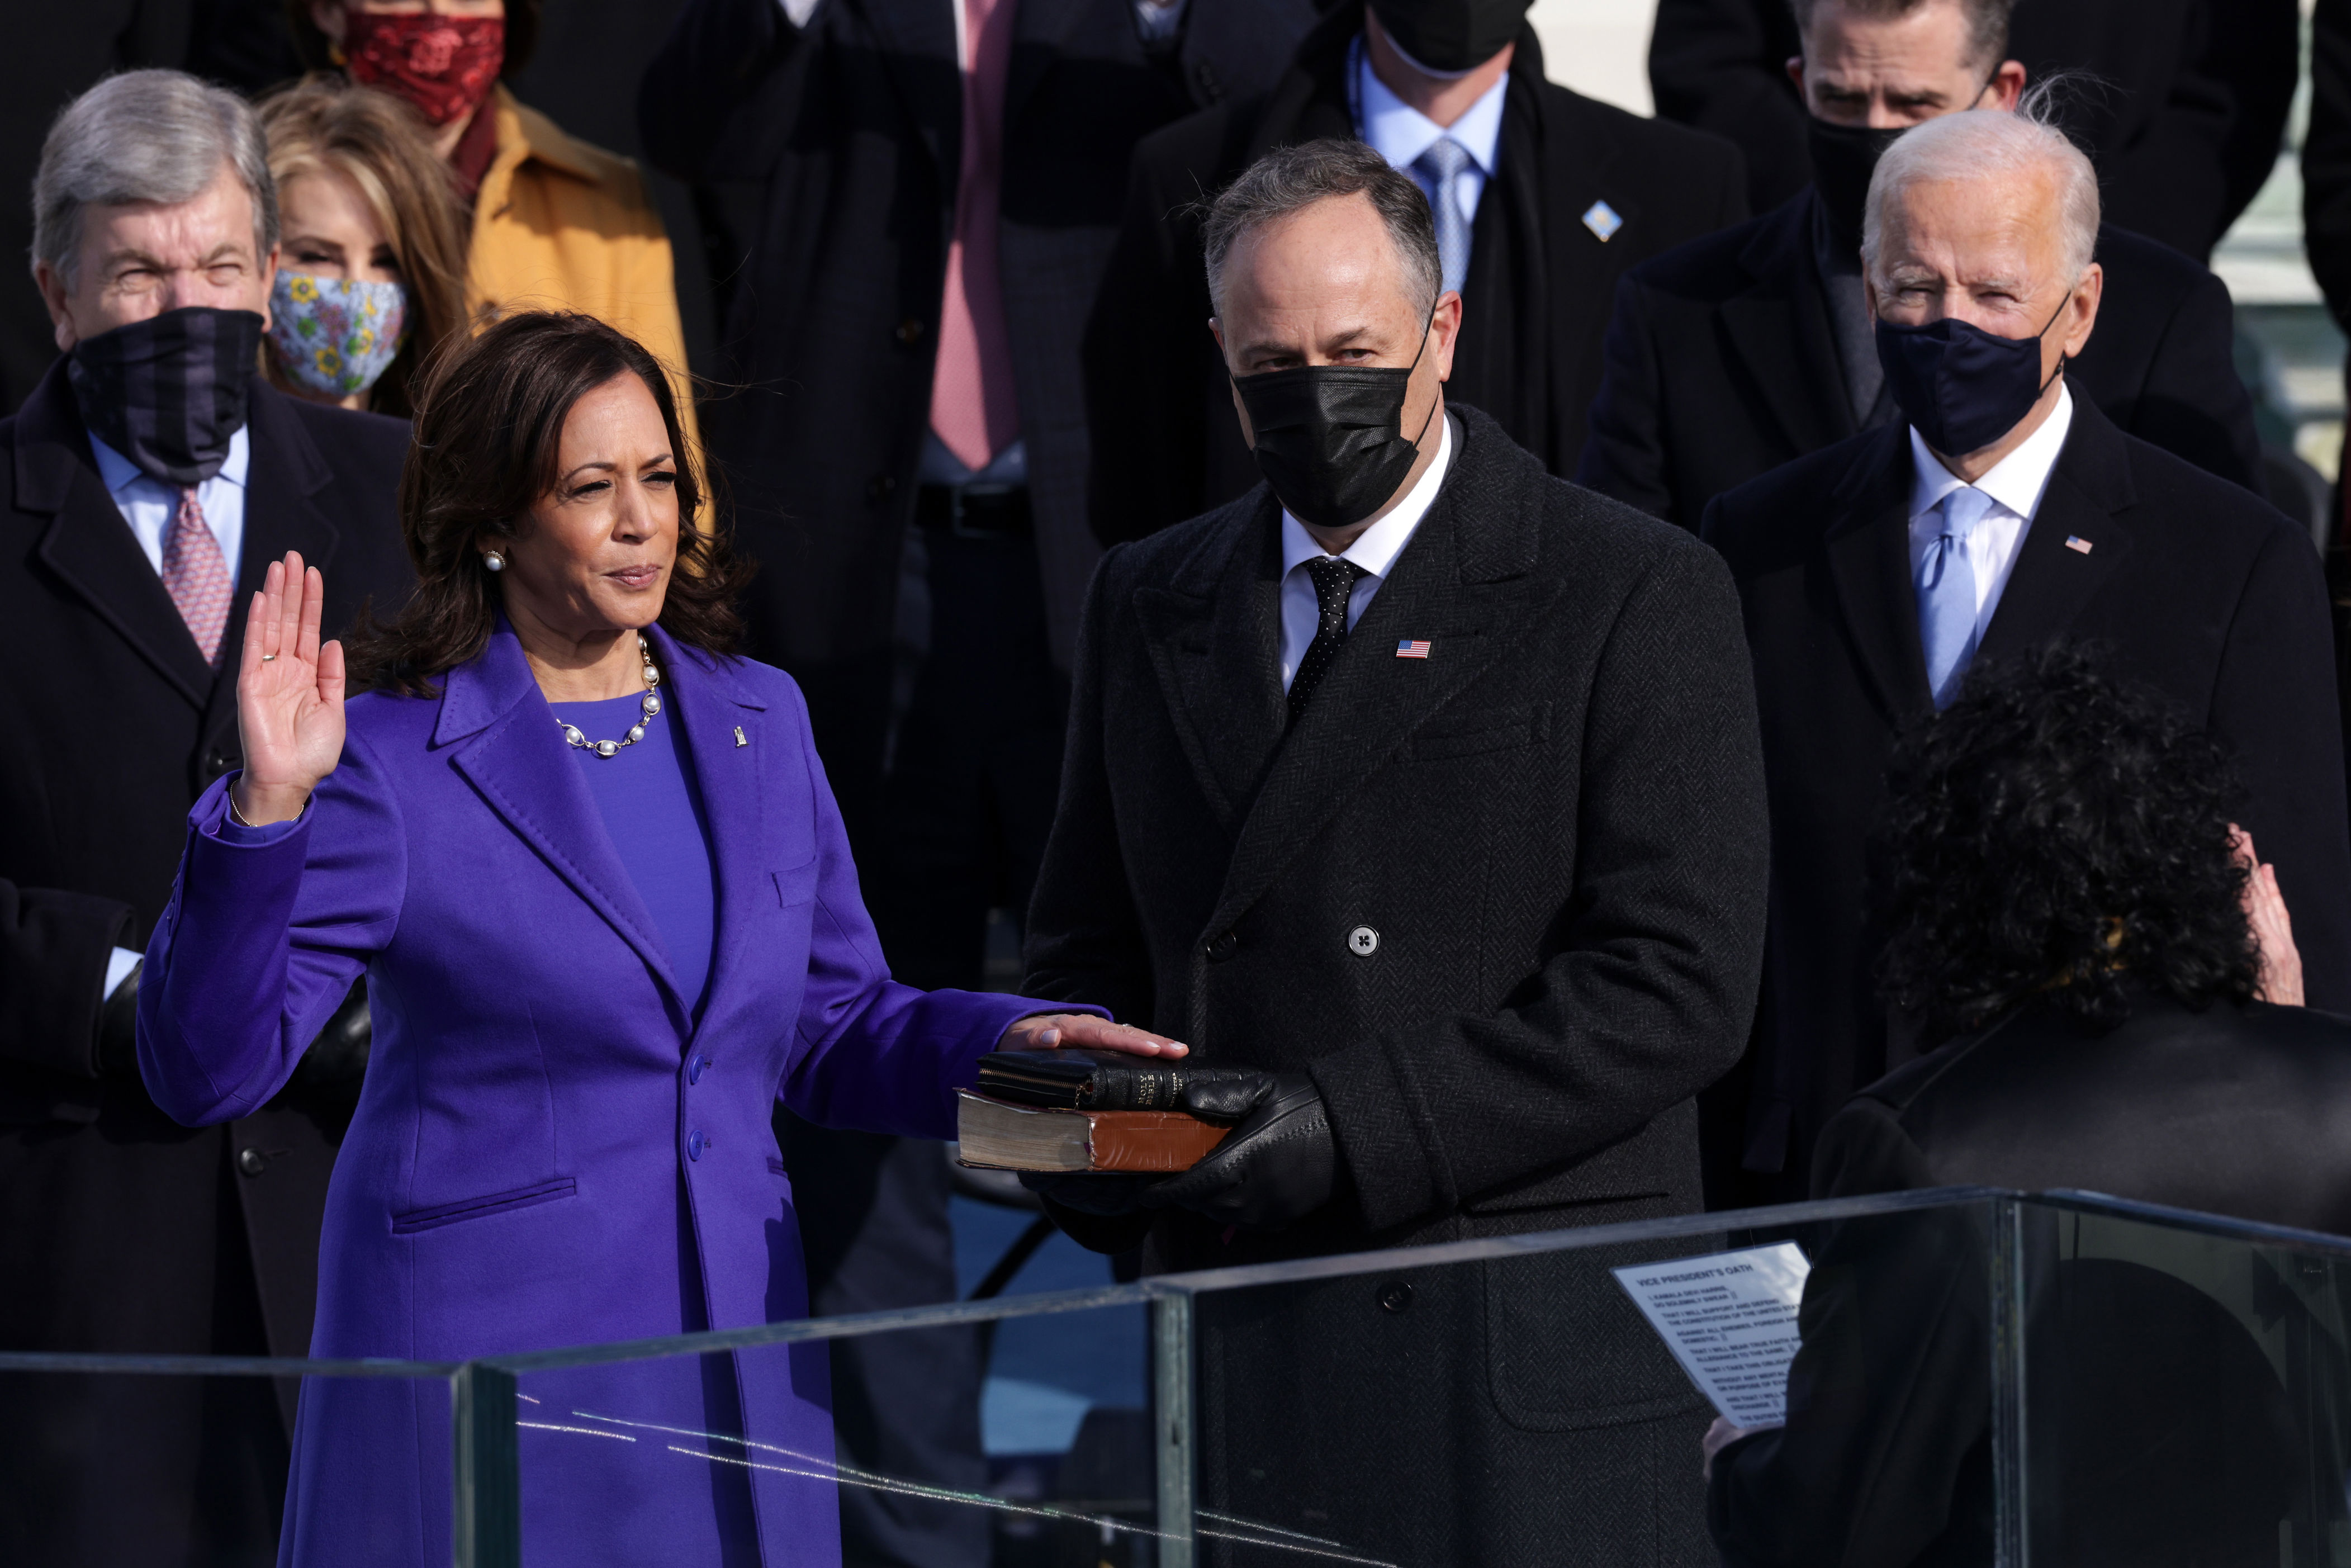 <p>On Jan. 20, 2021, former California attorney general and senator Kamala Harris became not only America's first female vice president but the country's first Black and first South Asian woman vice president when she <a href="https://www.wonderwall.com/celebrity/celebs-react-to-joe-bidens-inauguration-418834.gallery">took the oath of office on the steps of the U.S. Capitol</a> in Washington, D.C. In 2020, the Democrat from California -- who served her country alongside President Joe Biden -- also became the first woman of color on a U.S. presidential ticket for a major party.</p>